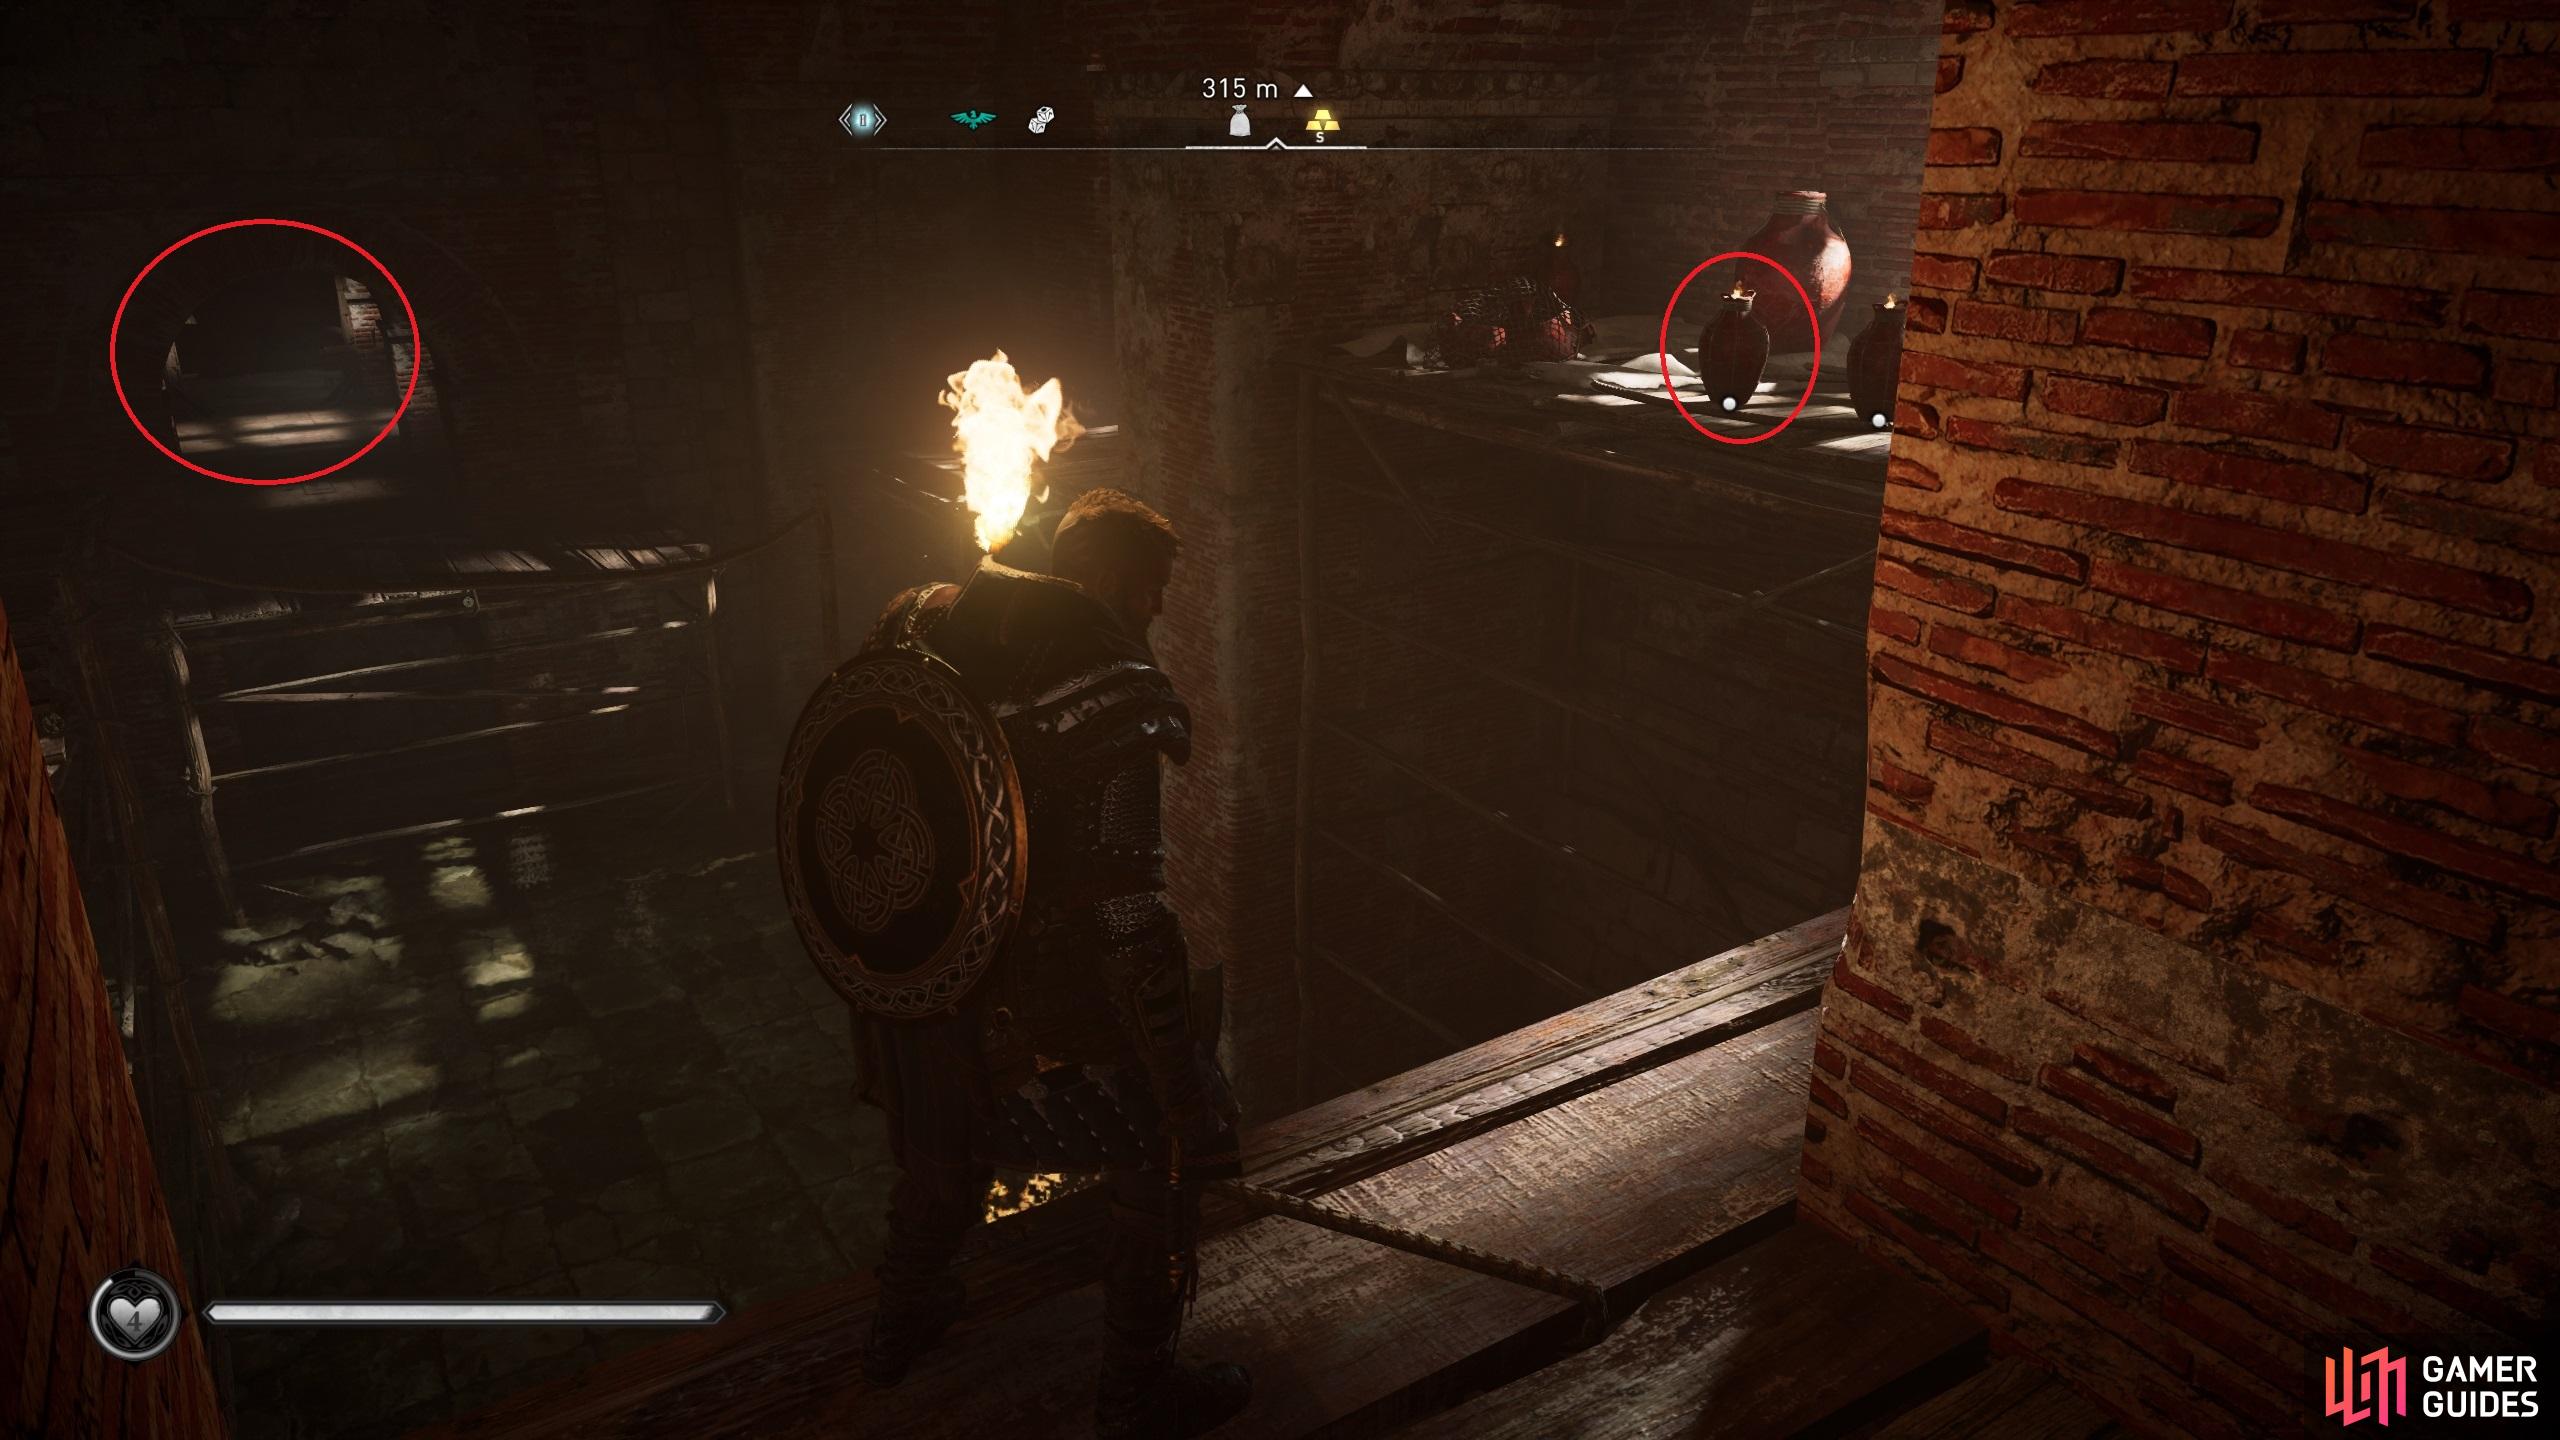 Youll find fire pots on the western side of the open room, which you can use to destroy the blockade on the other side.